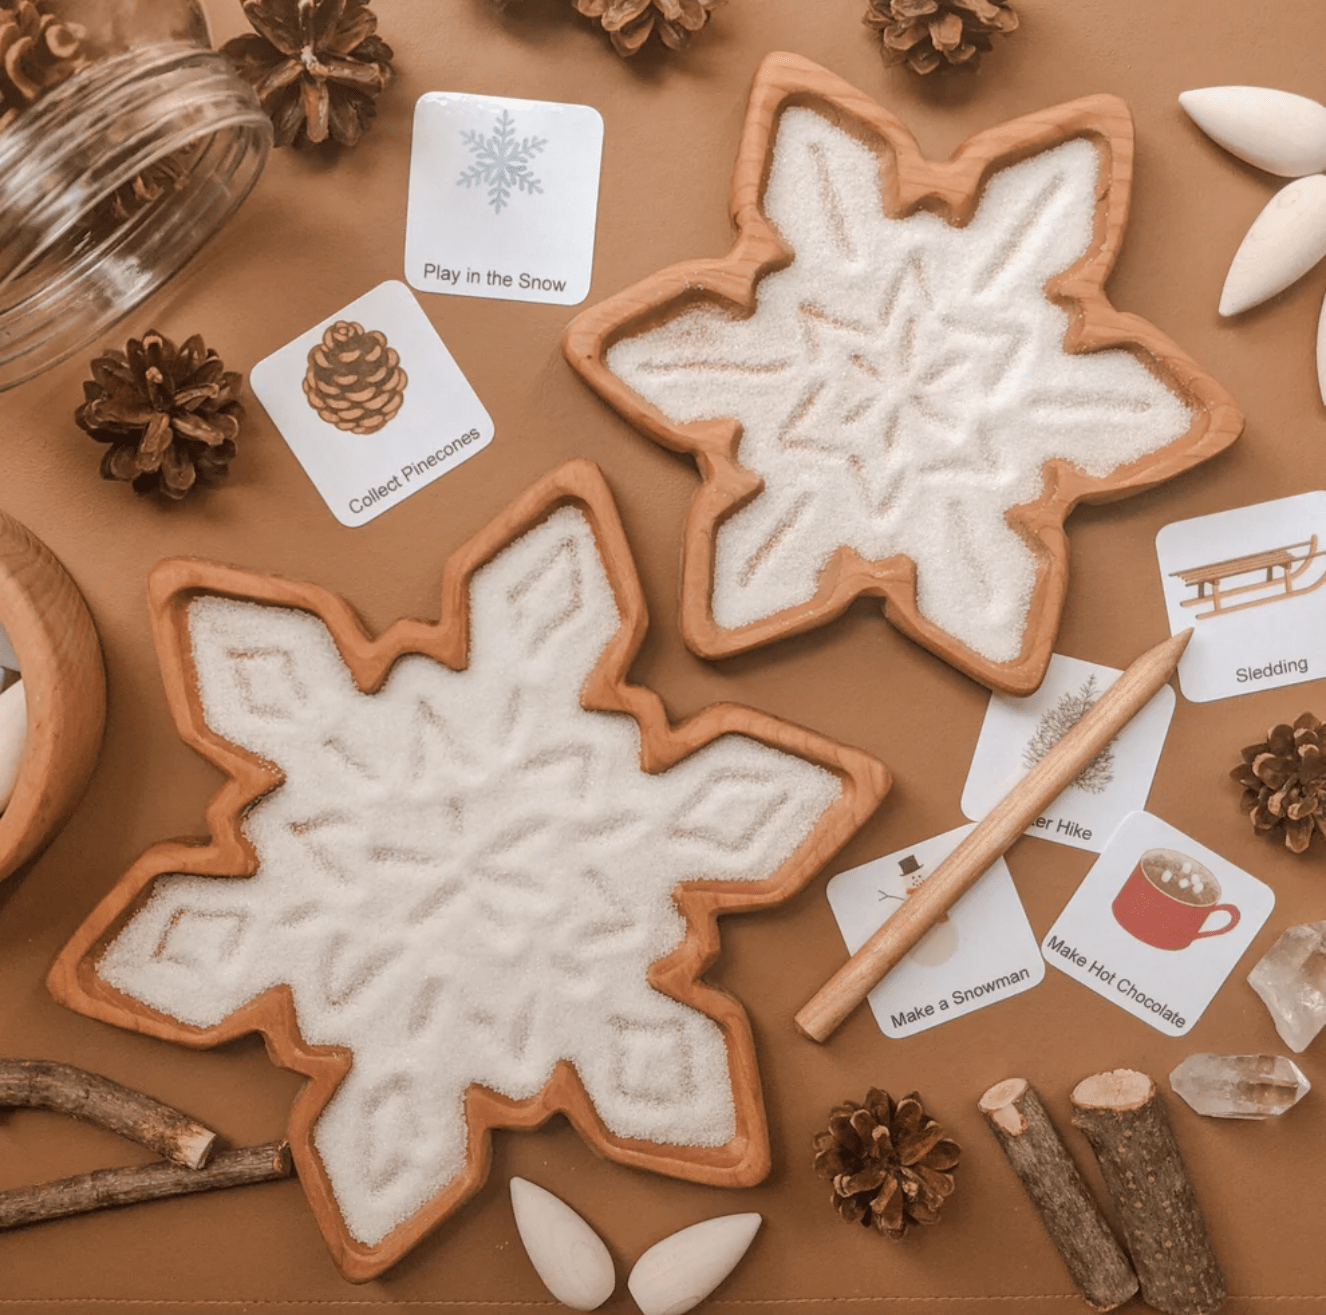 Aw & Co. Sensory Play Wooden Snowflake Plate / Sensory Tray (Made in Canada)